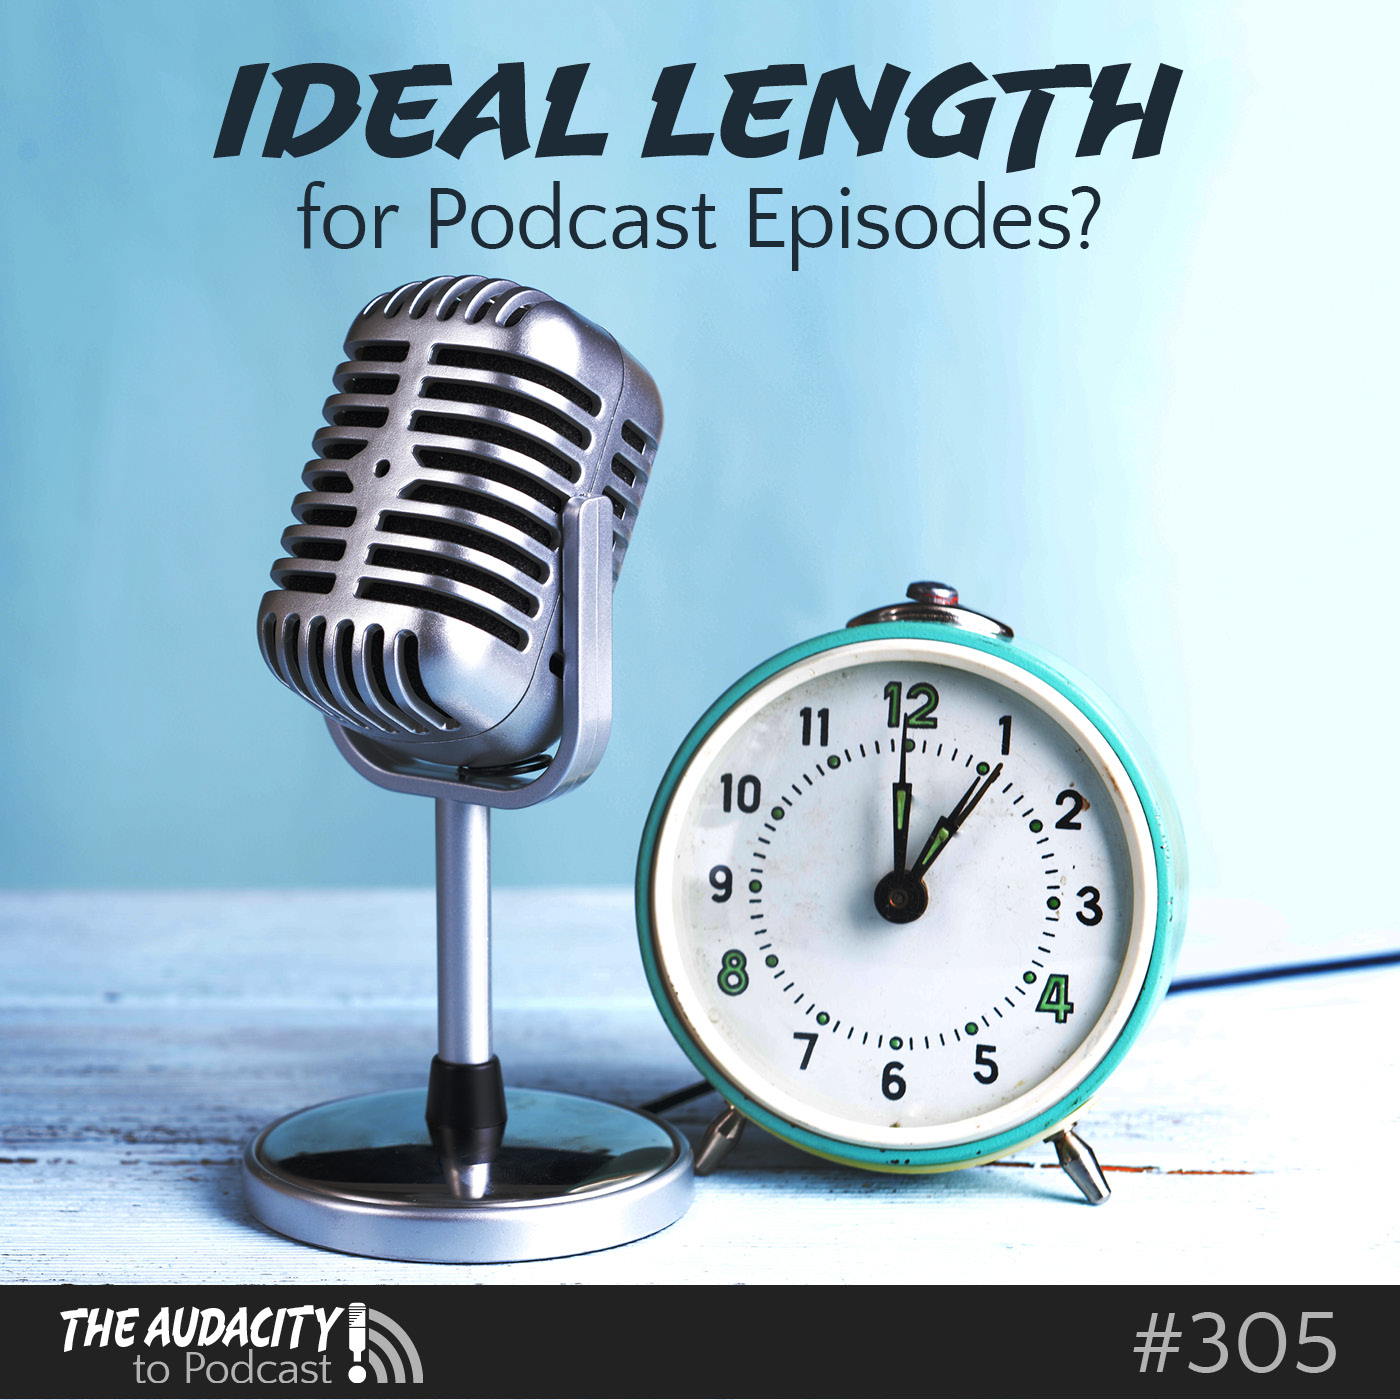 Is There an Ideal Length for Podcast Episodes?